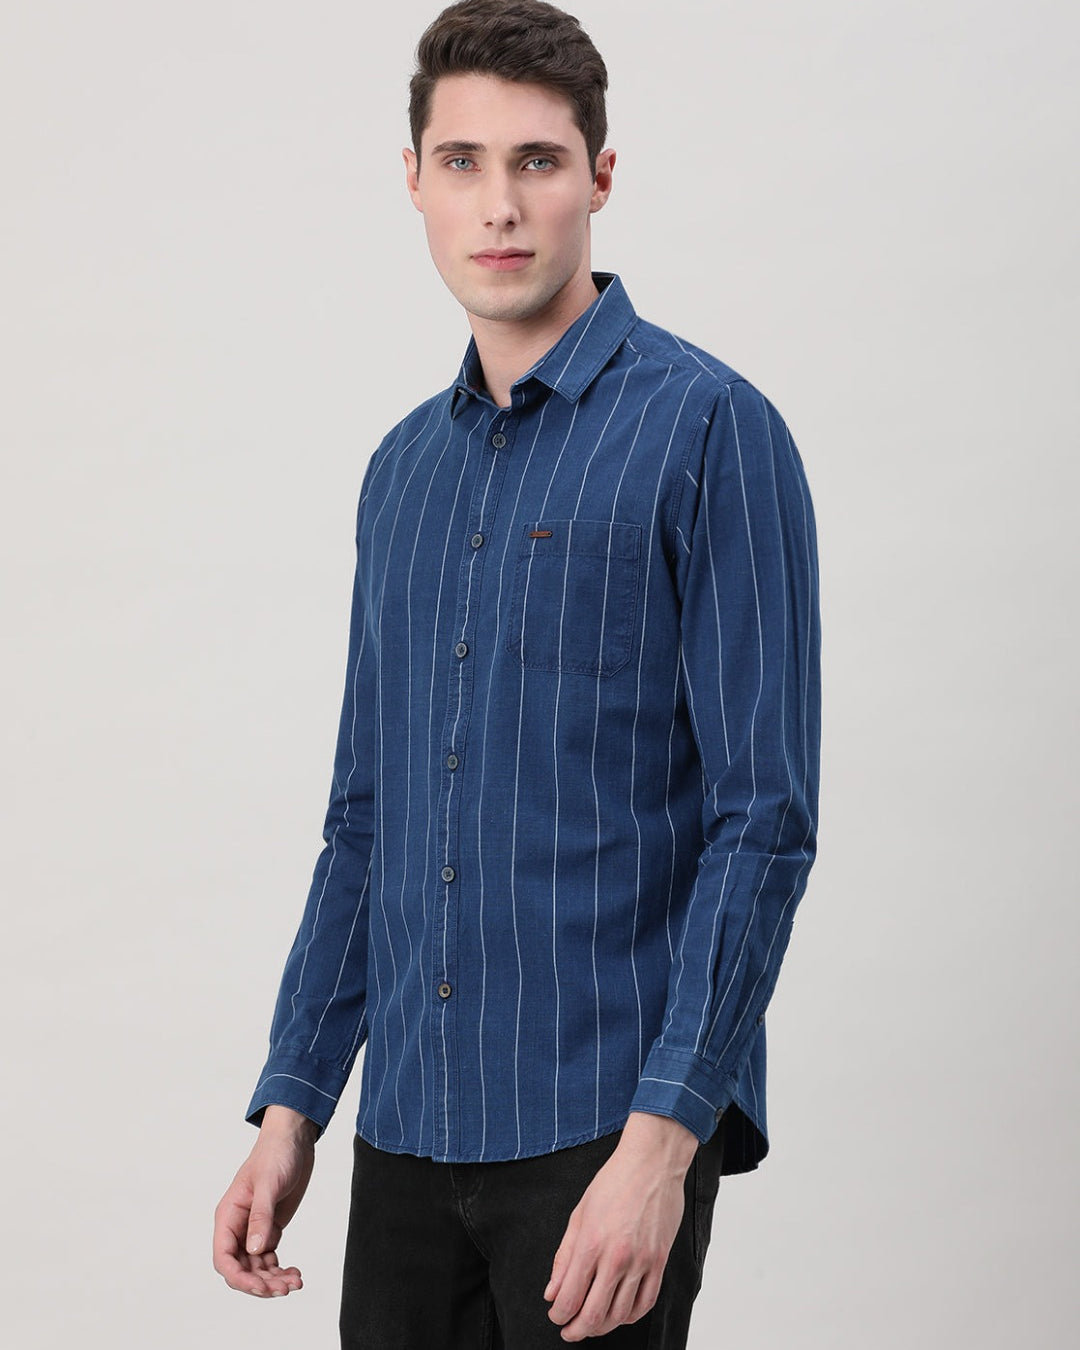 Casual Full Sleeve Comfort Fit Stripe Shirt Indigo with Collar for Men